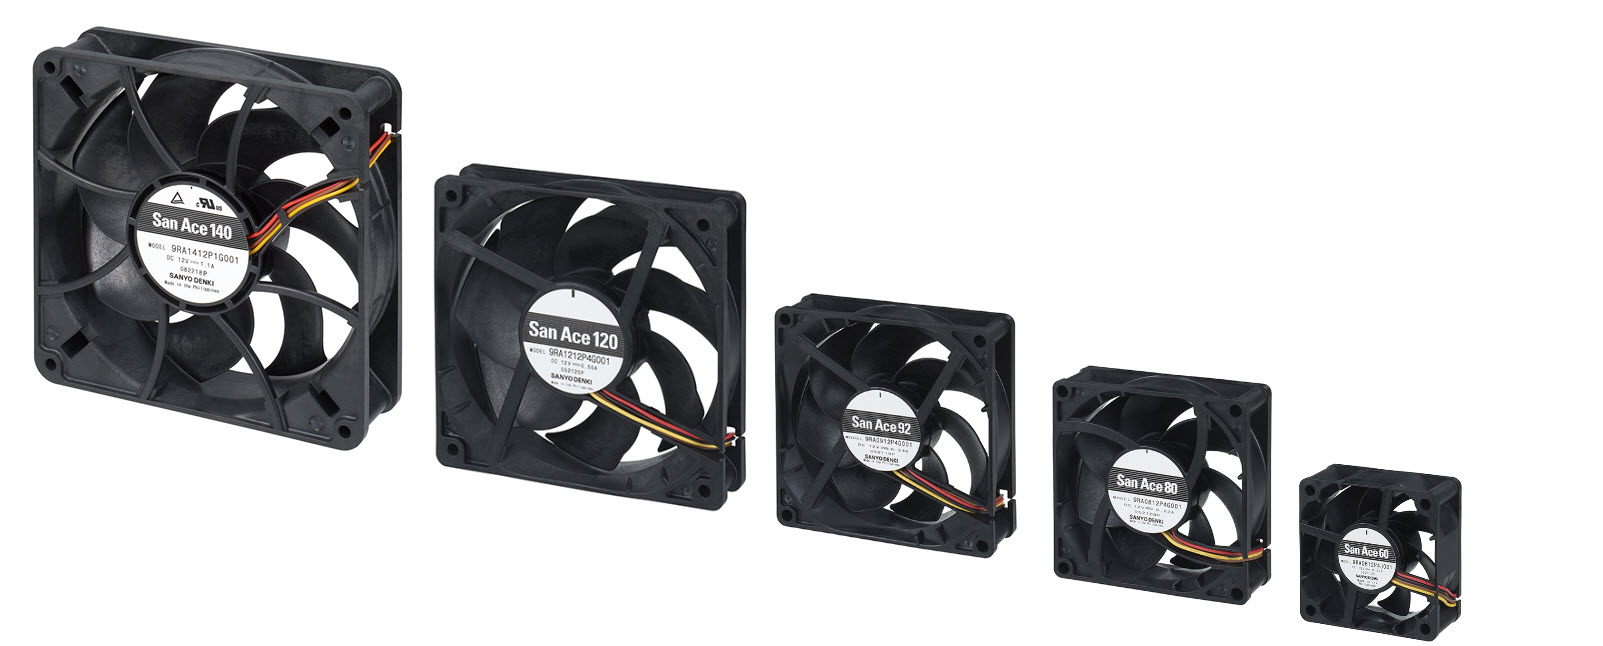 Latest low noise, energy efficient cooling fans offer extended life time